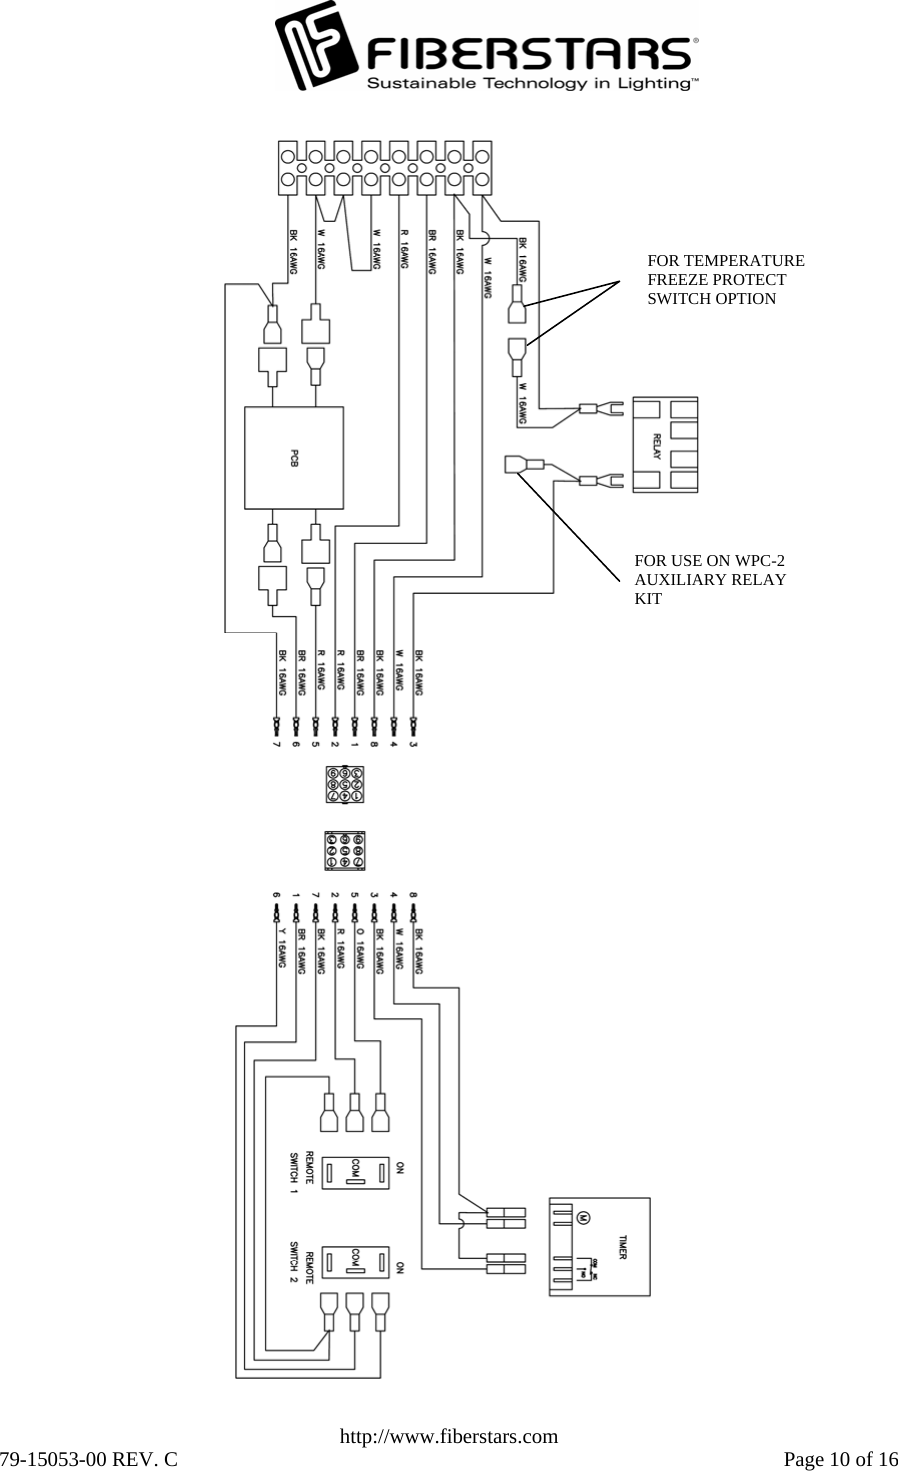   http://www.fiberstars.com 79-15053-00 REV. C    Page 10 of 16 FOR TEMPERATURE FREEZE PROTECT SWITCH OPTION FOR USE ON WPC-2 AUXILIARY RELAY KIT  